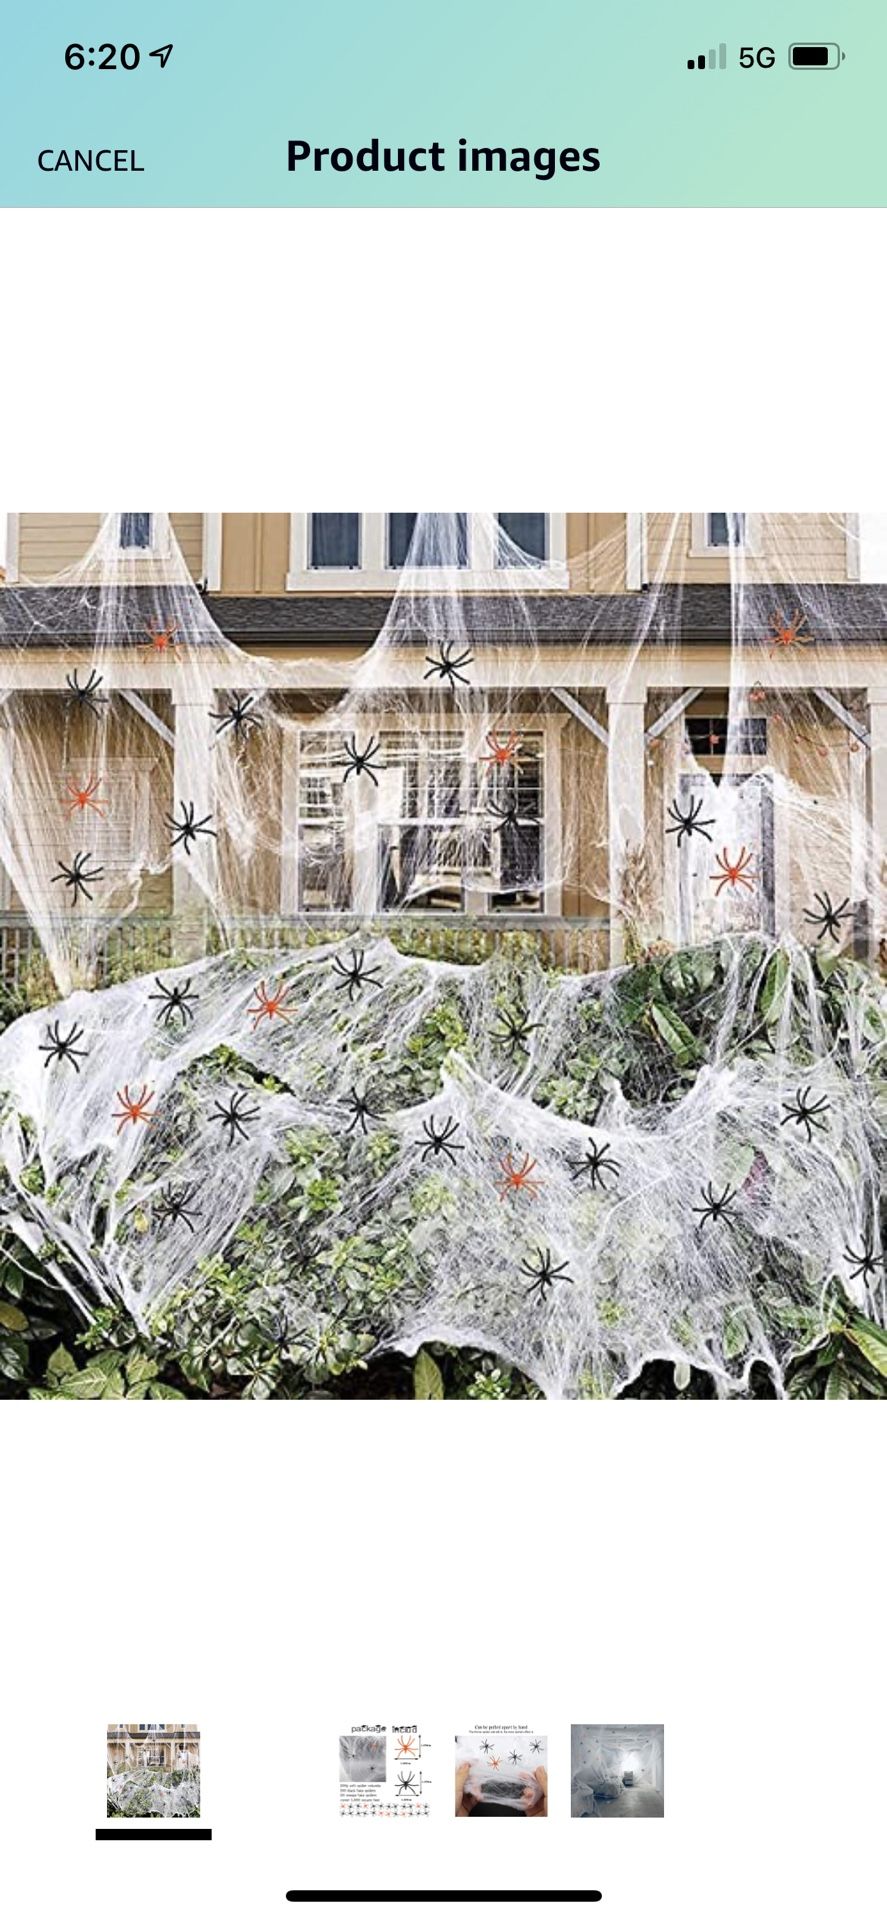 1000 sqft Halloween Spider Web with 150 Fake Spiders Creepy Halloween Decorations Indoor Outdoor Spooky Haunted House Yard Lawn Decoration Party Favor